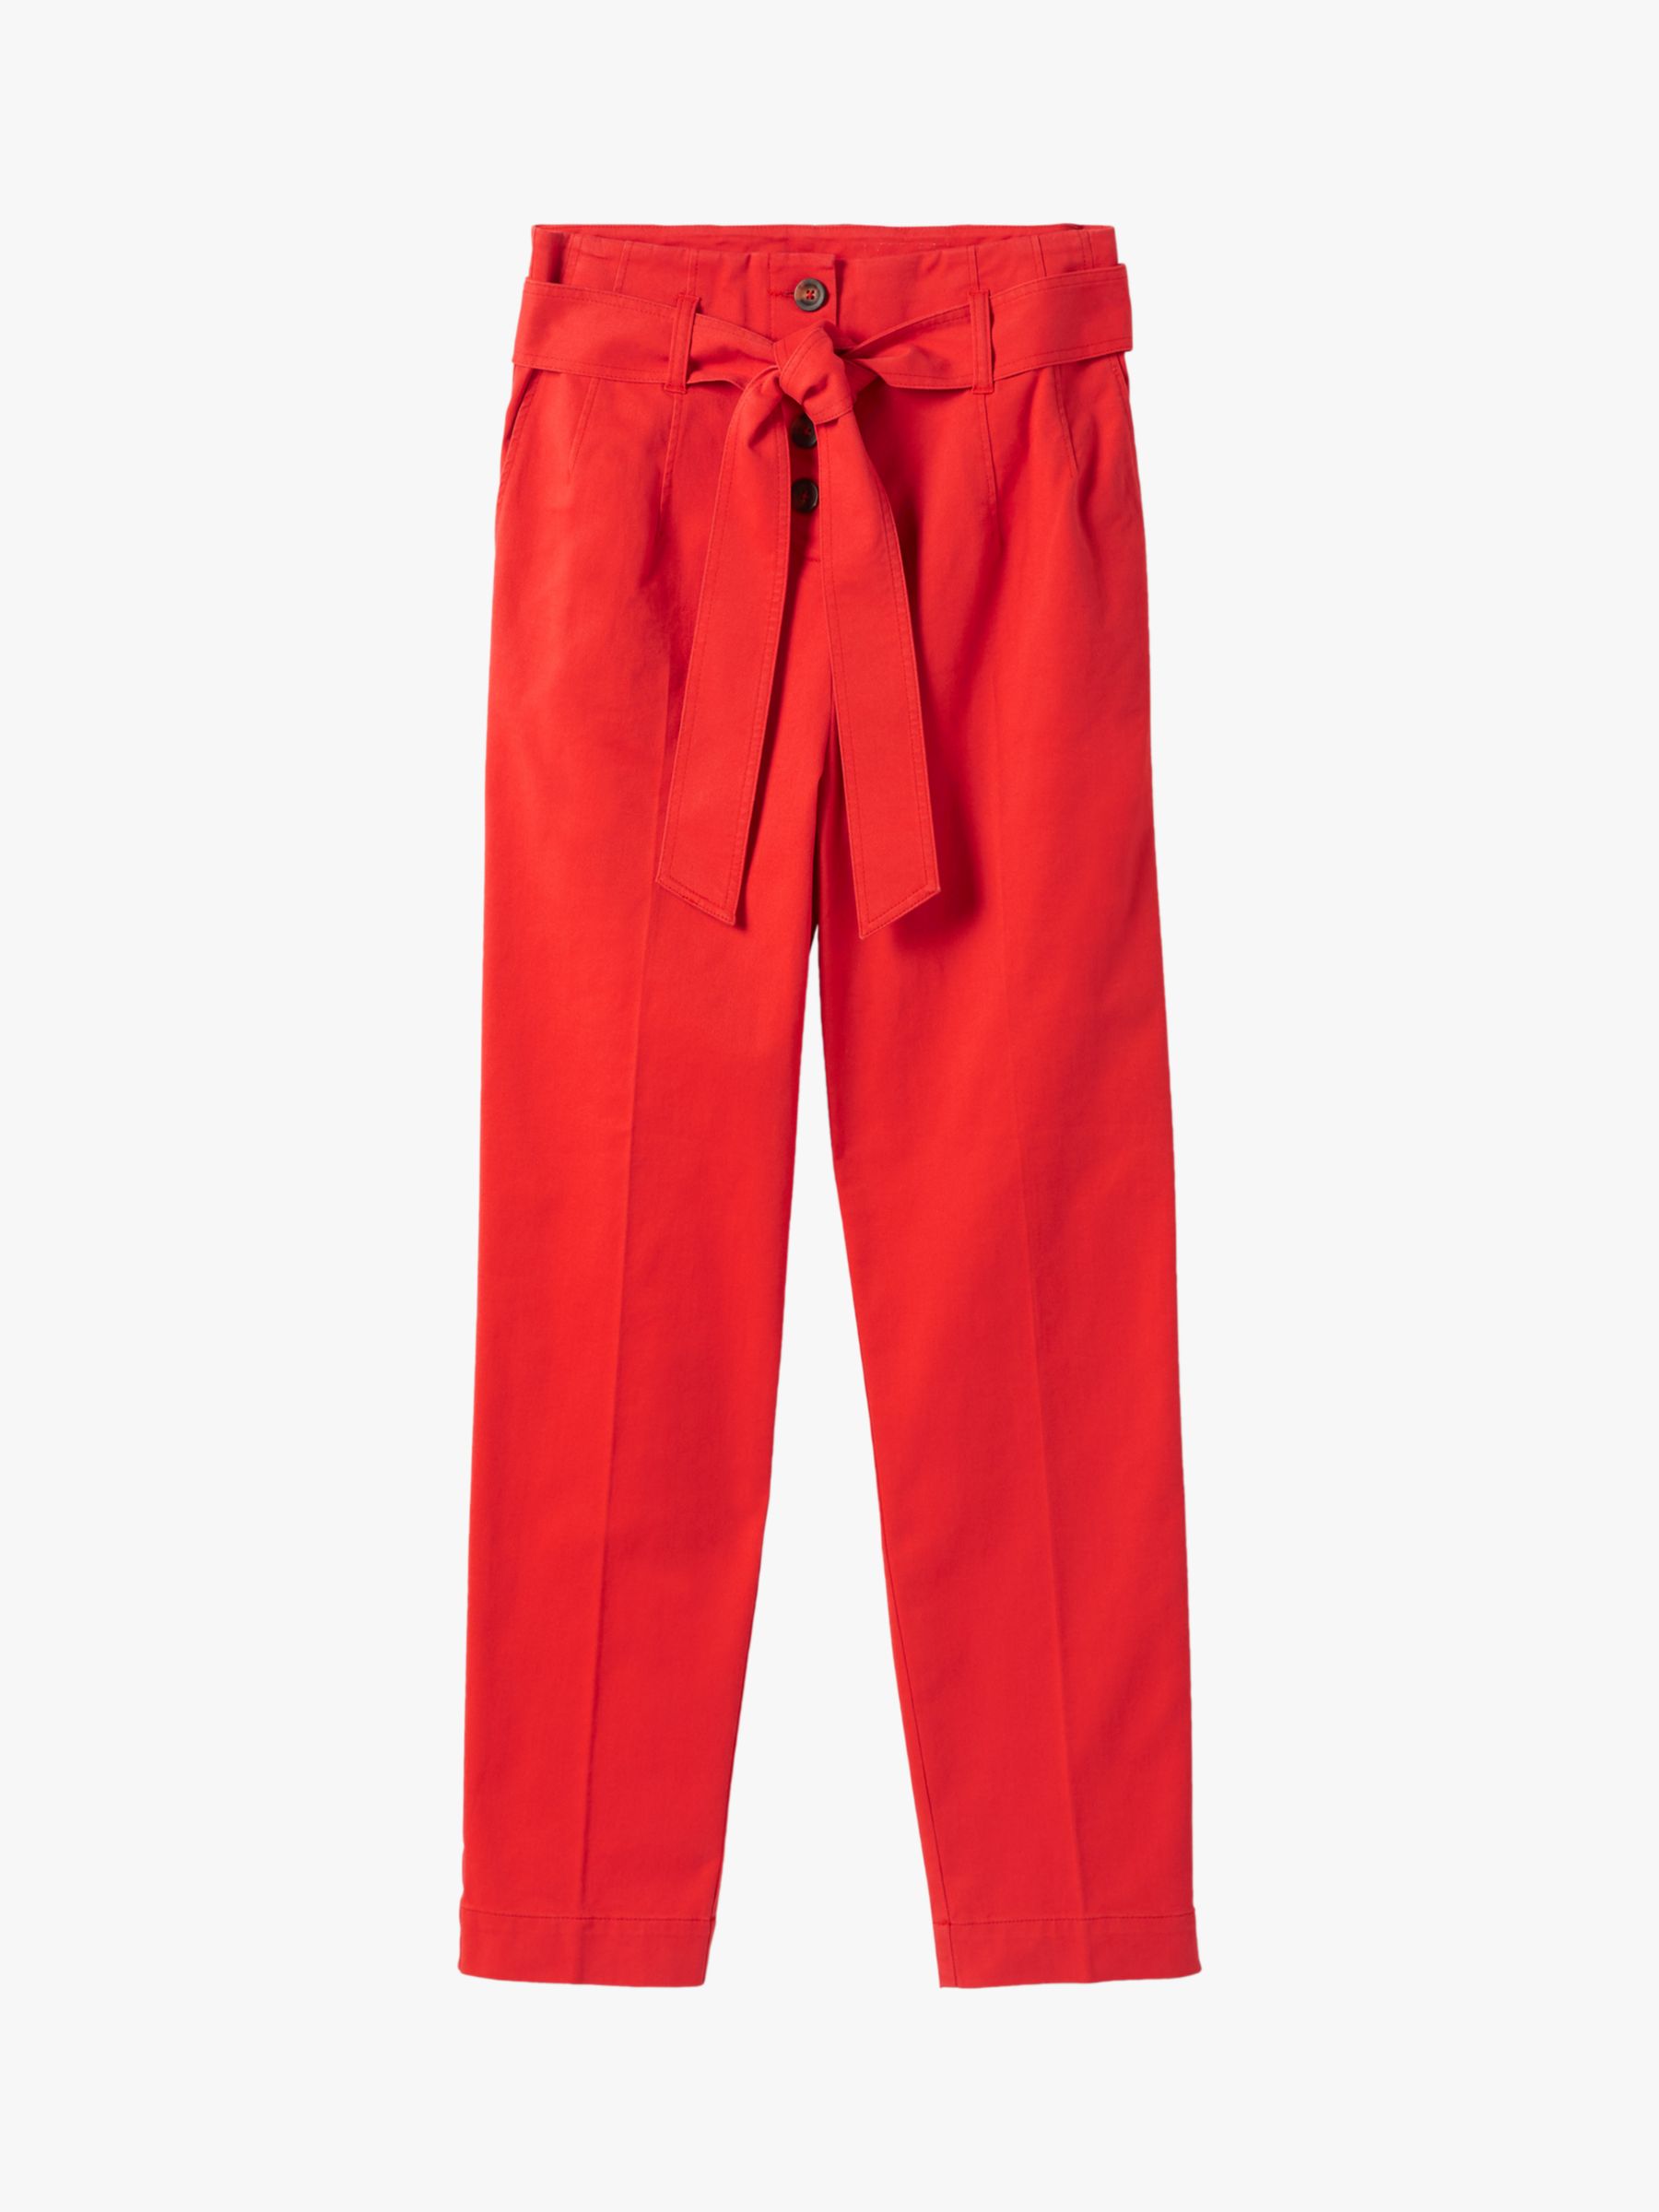 Boden Berkeley Tapered Trousers, Red at John Lewis & Partners